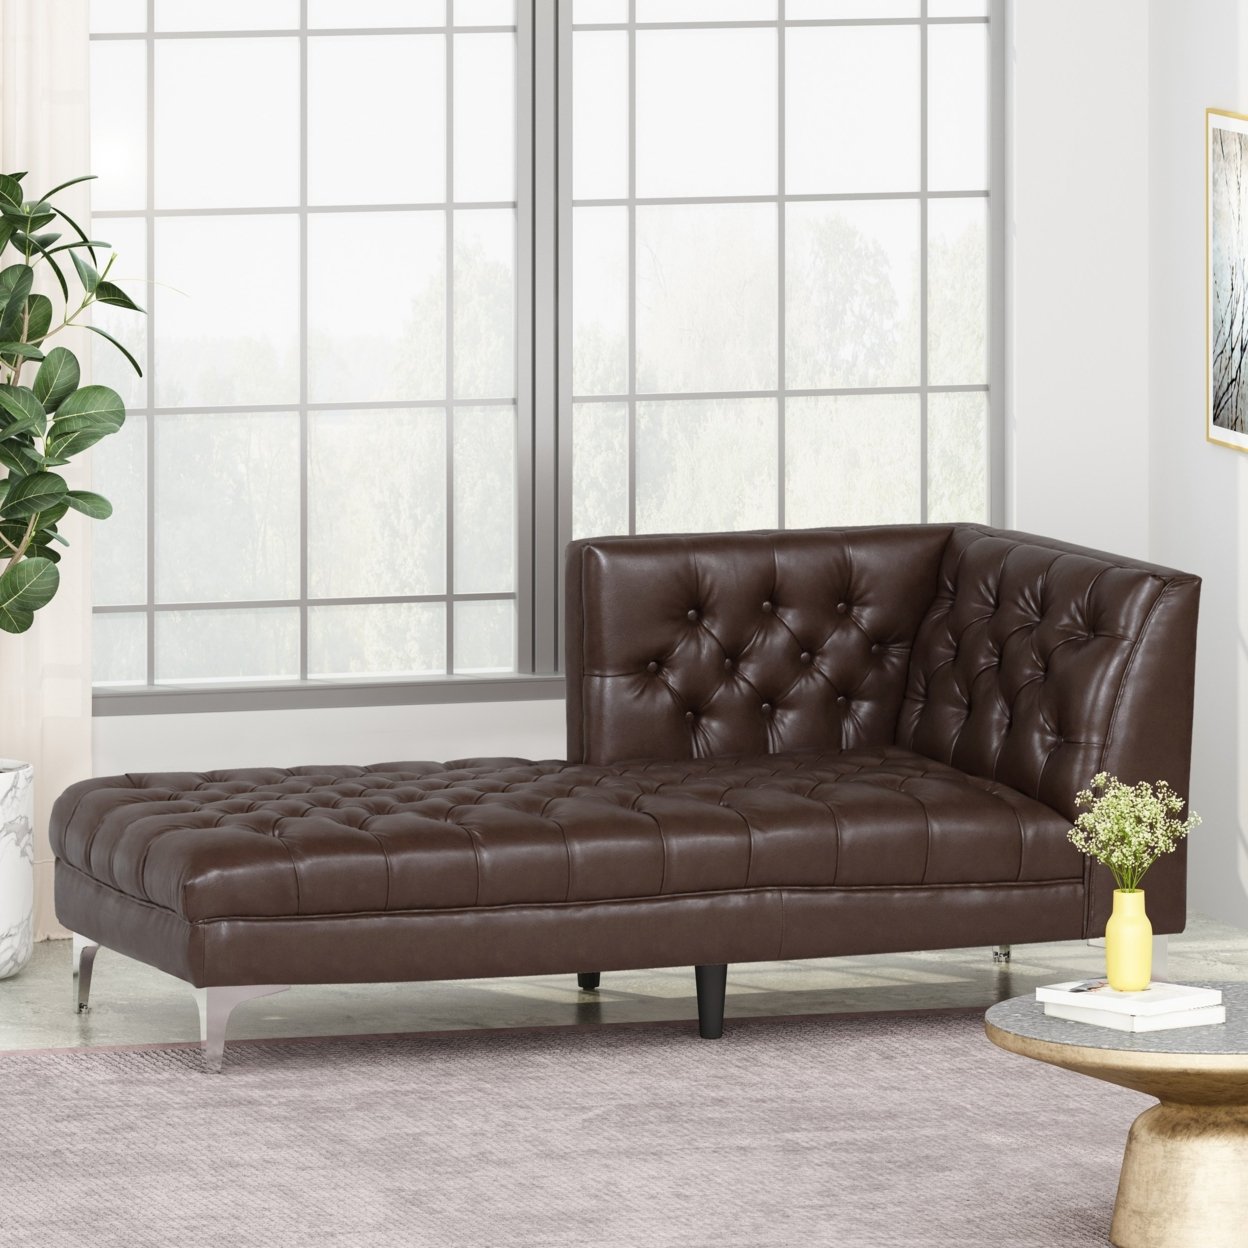 Bluffton Contemporary Tufted One Armed Chaise Lounge - Silver/dark Brown